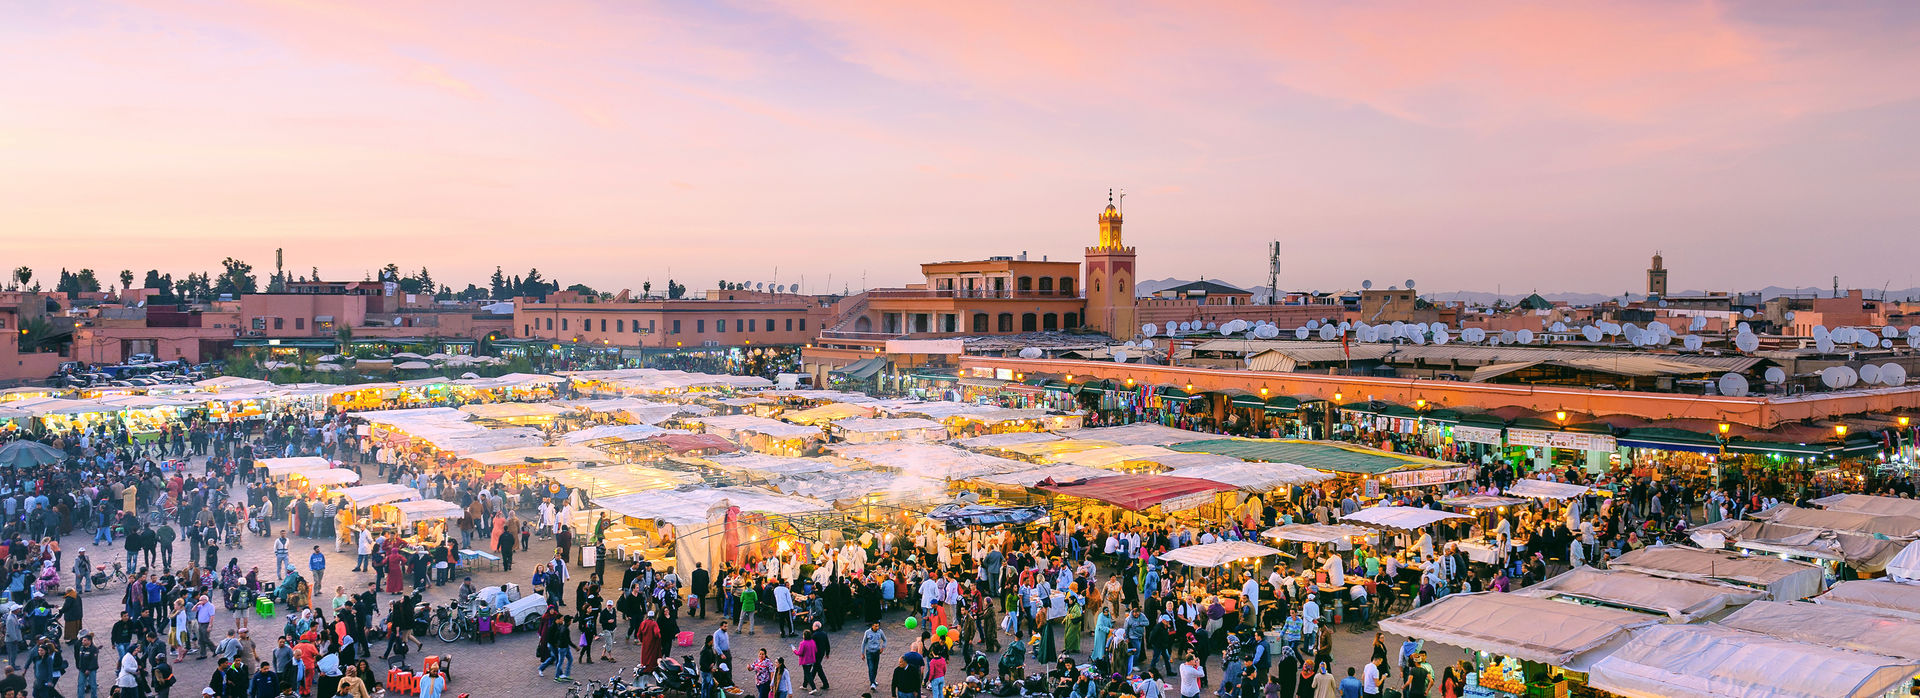 Morocco - What to Do and Where to Go